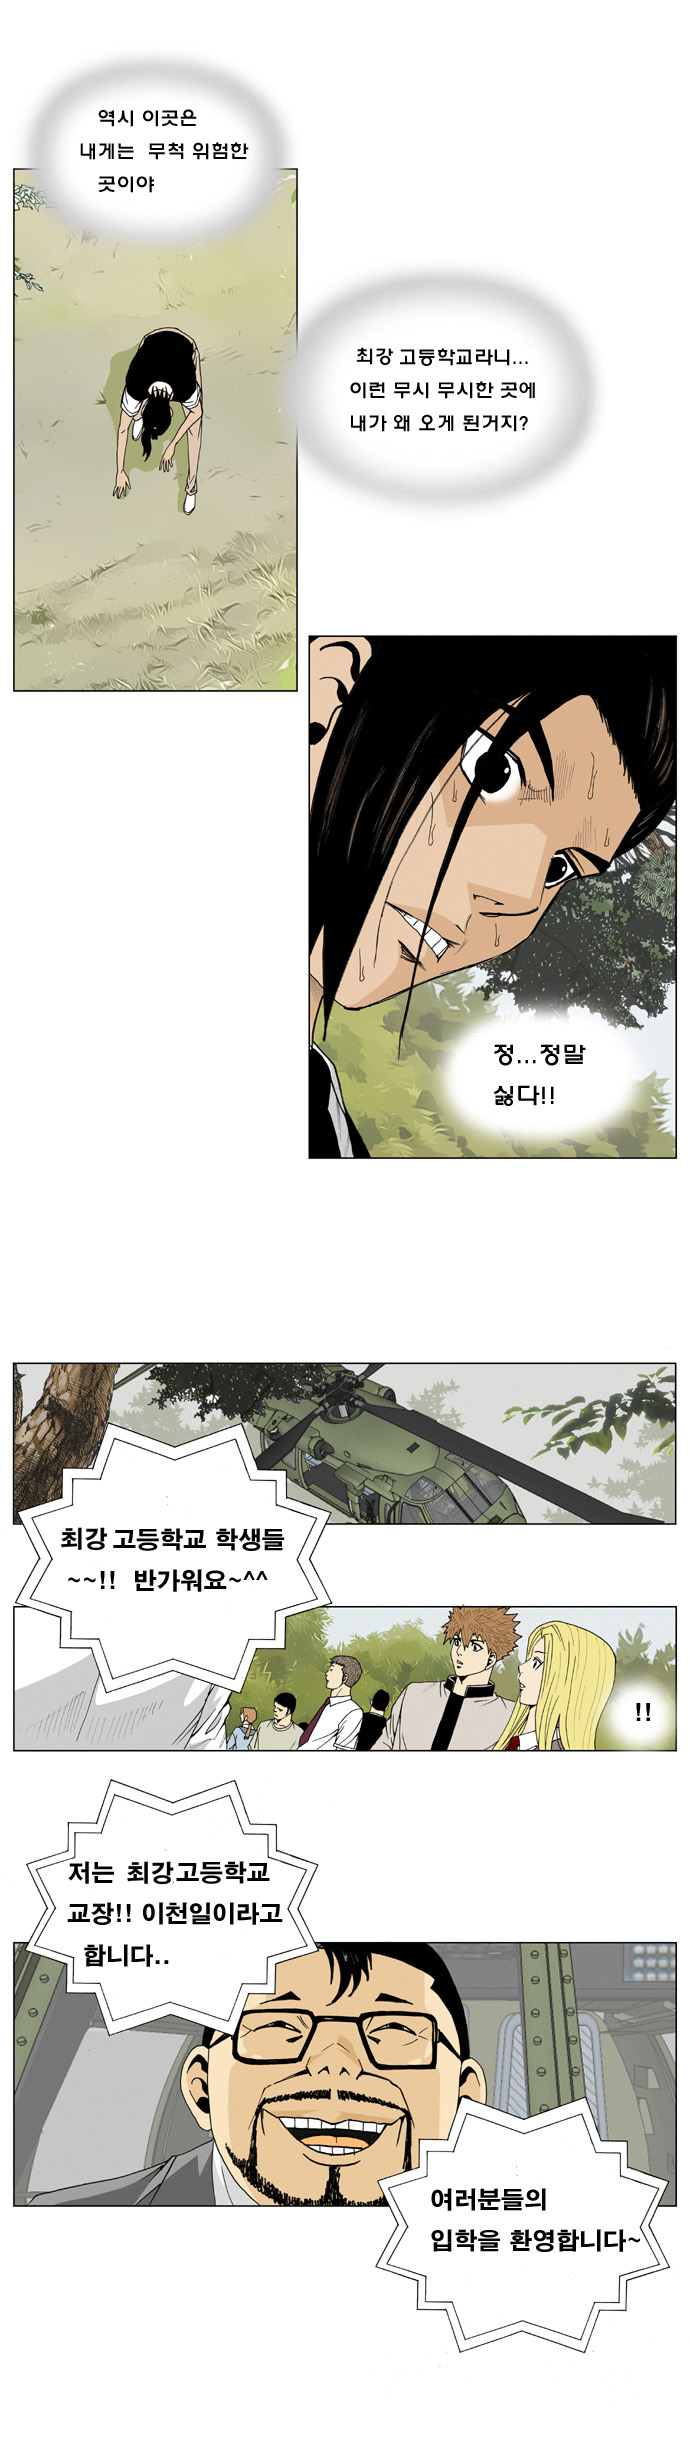 Ultimate Legend - Kang Hae Hyo - Chapter 2 - Page 4